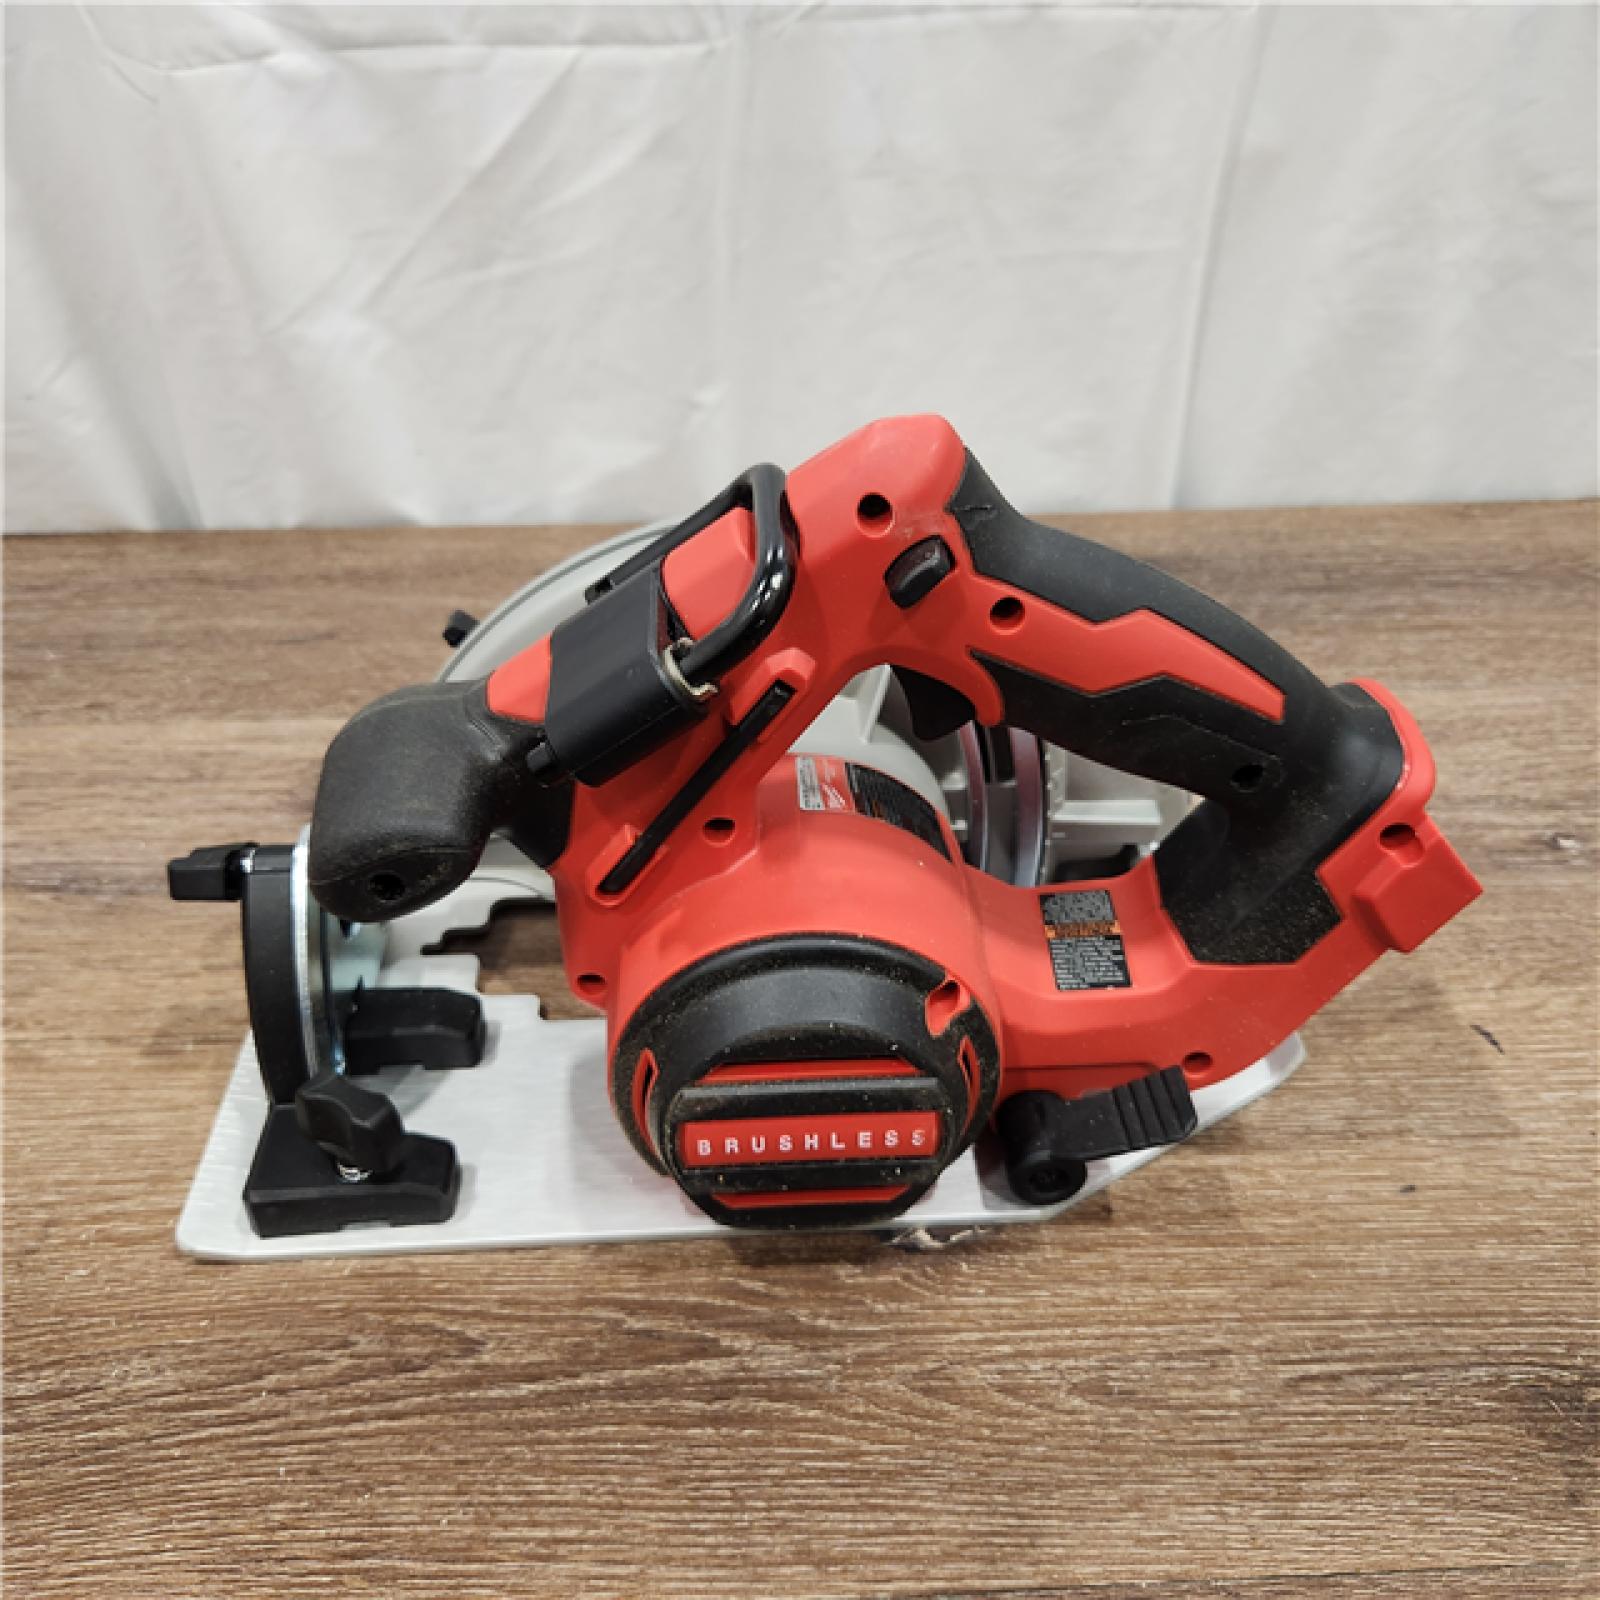 AS-IS M18 18V Lithium-Ion Brushless Cordless 7-1/4 in. Circular Saw (Tool-Only)